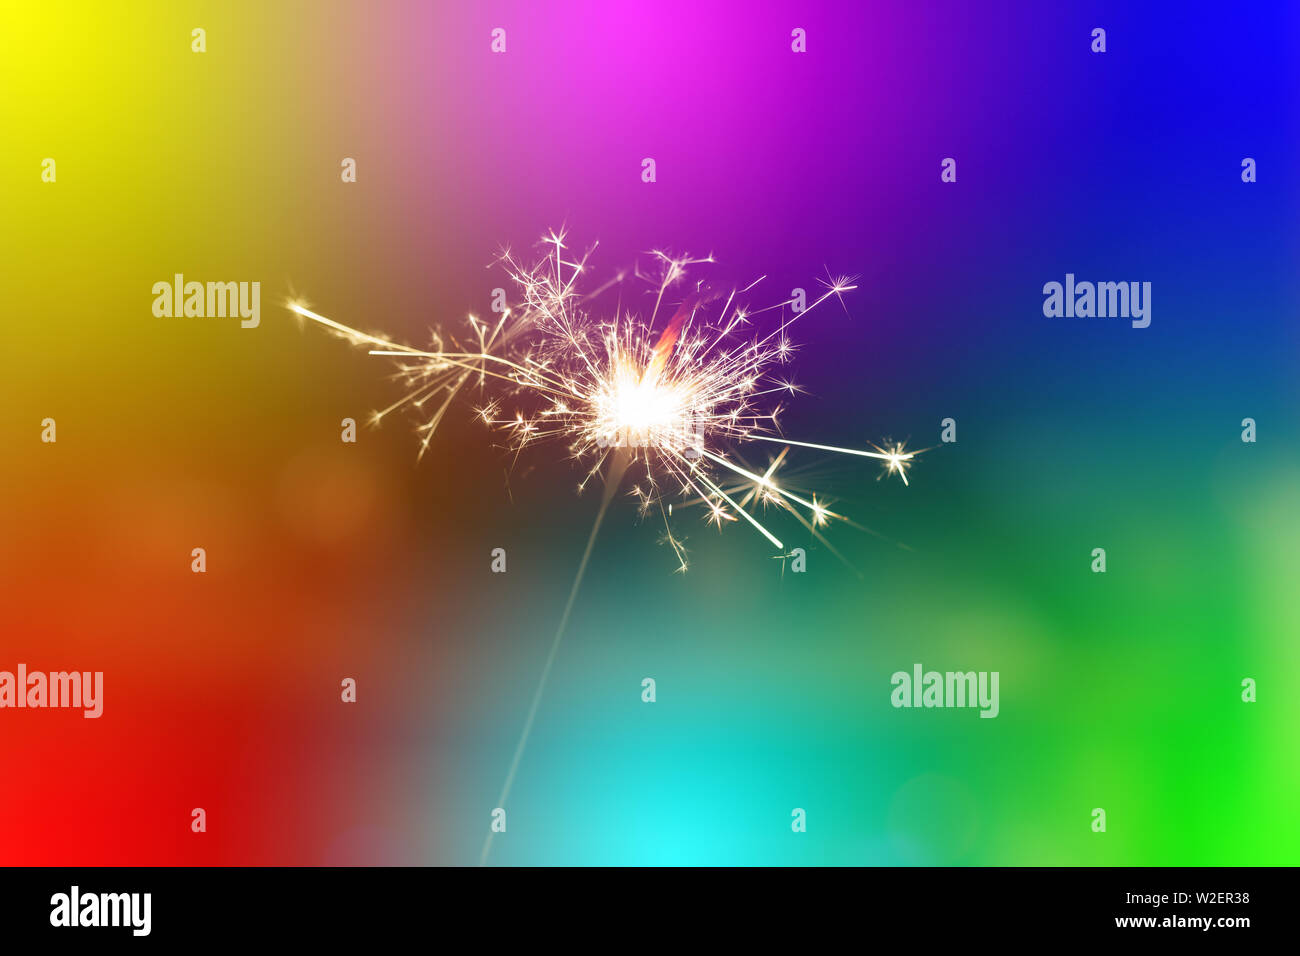 Sparks from hand cold fireworks colorful background Stock Photo